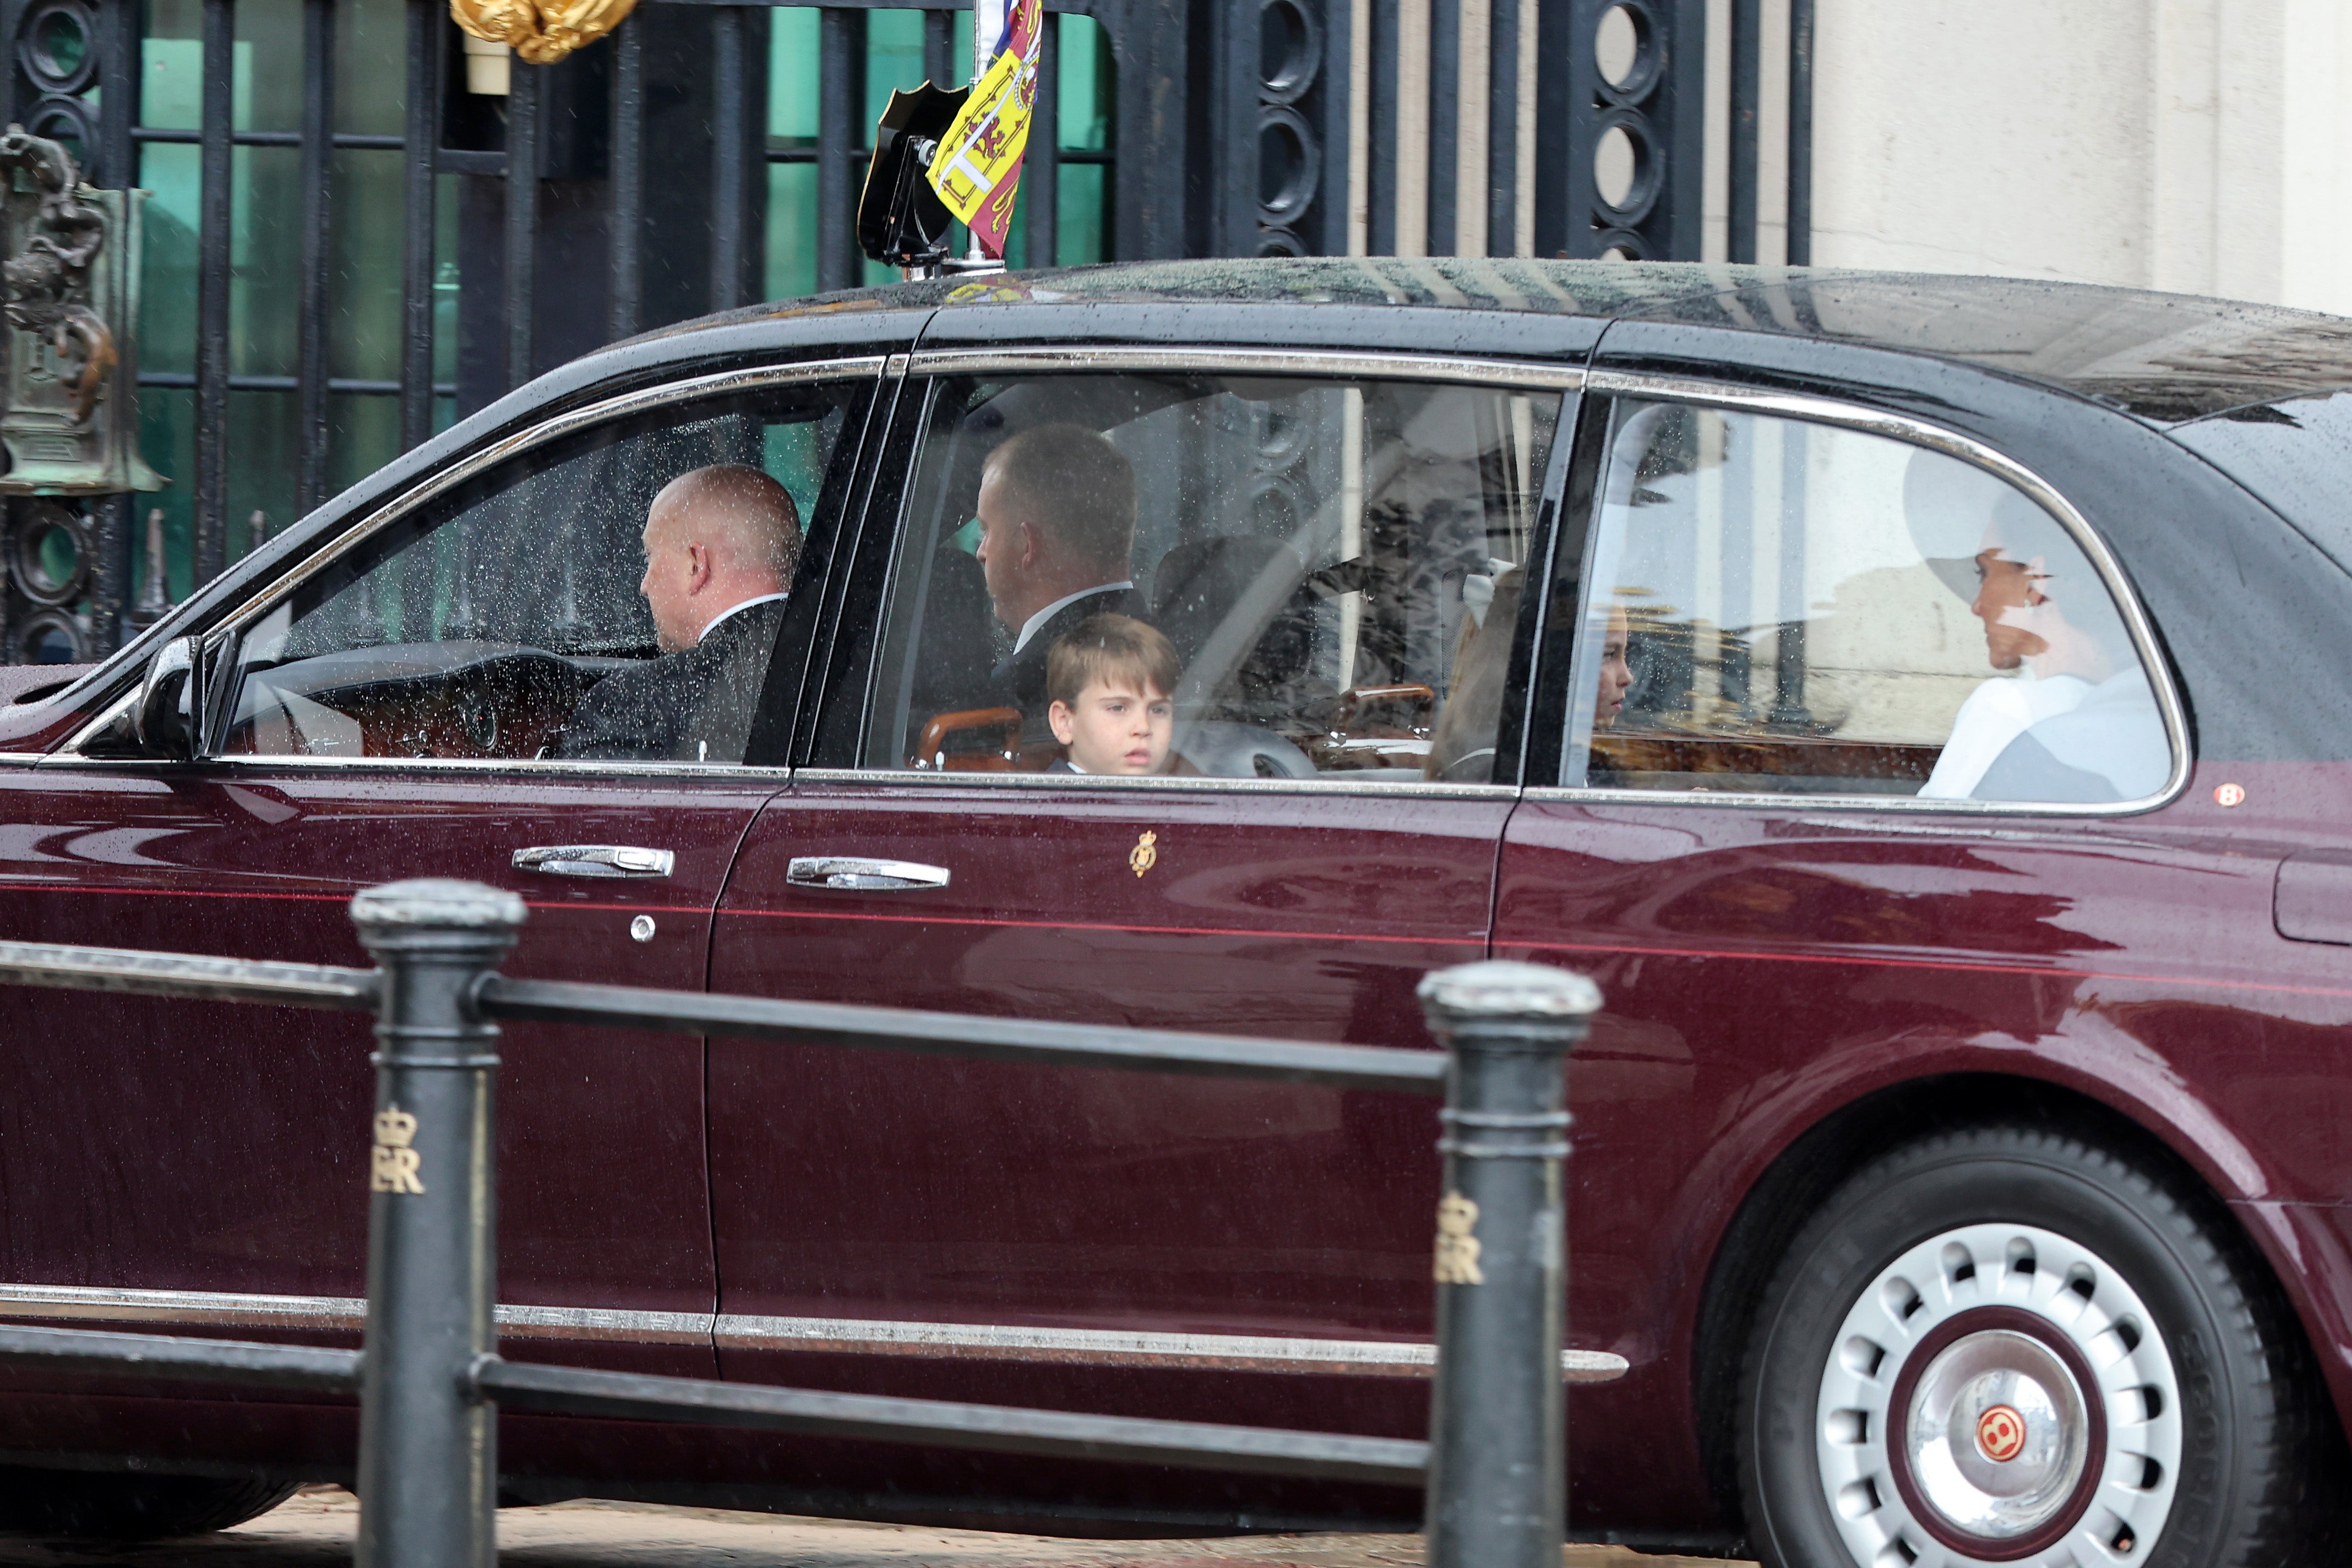 Prince Louis has also been seen with his brothers.